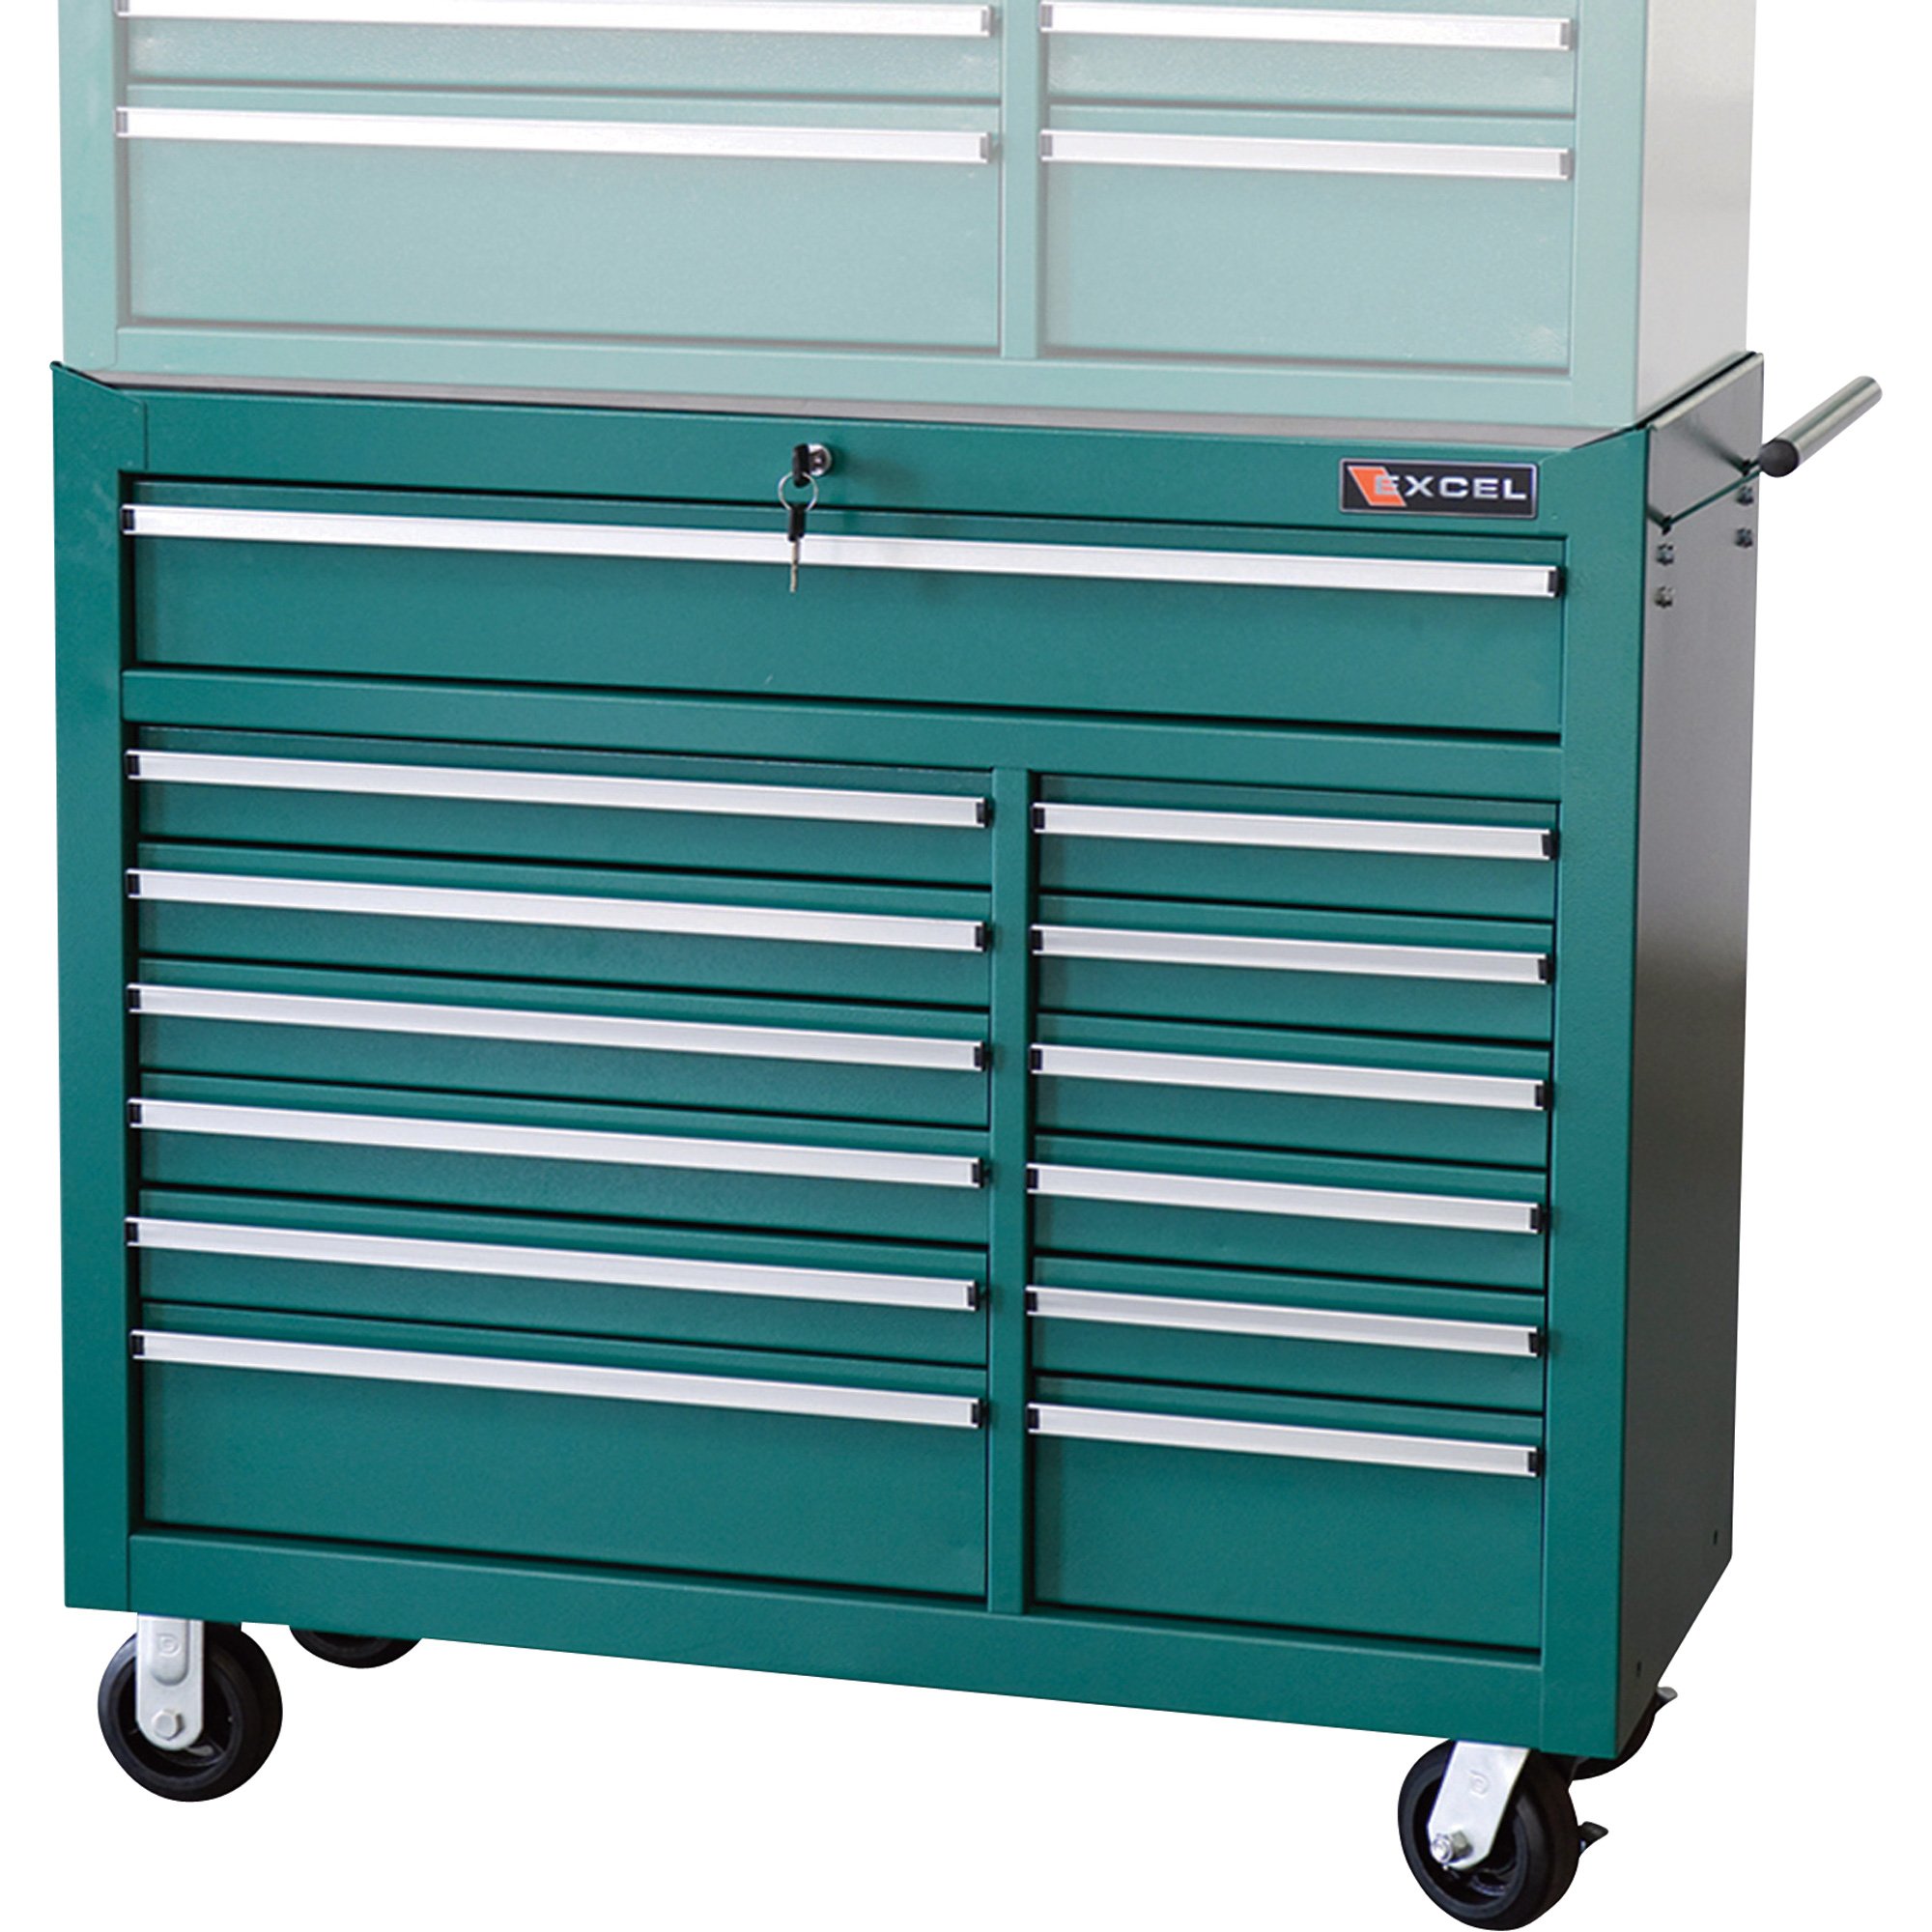 Sidchrome 204 Piece 13 Drawer Hyper Colour Series Tool Kit (Teal